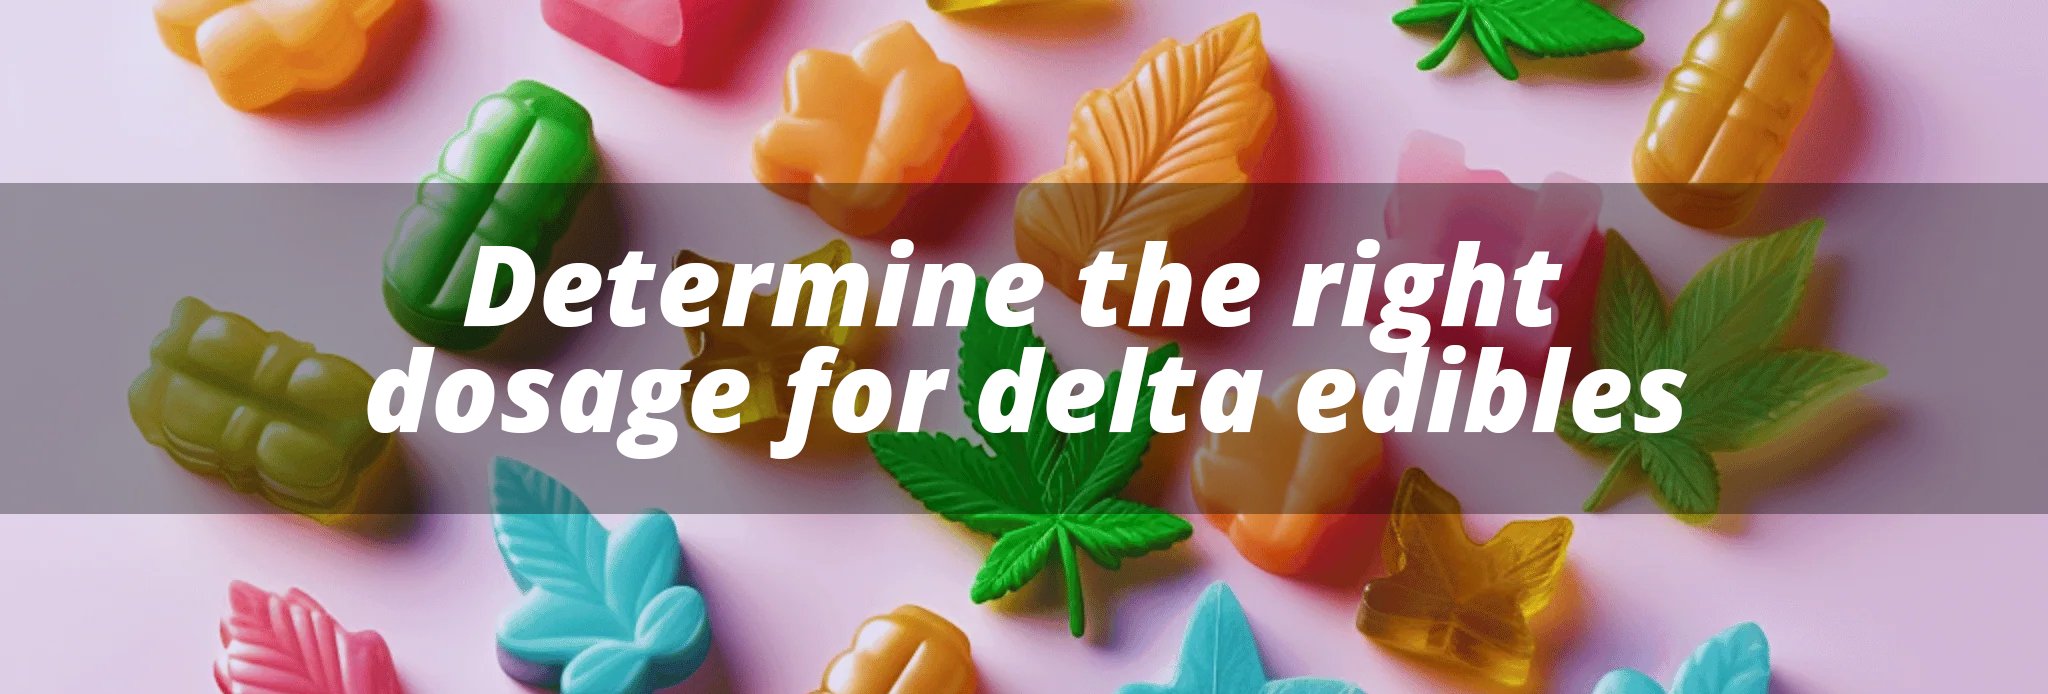 How To Determine the right dosage for delta edibles? Complete Guide - DeltaCloudz